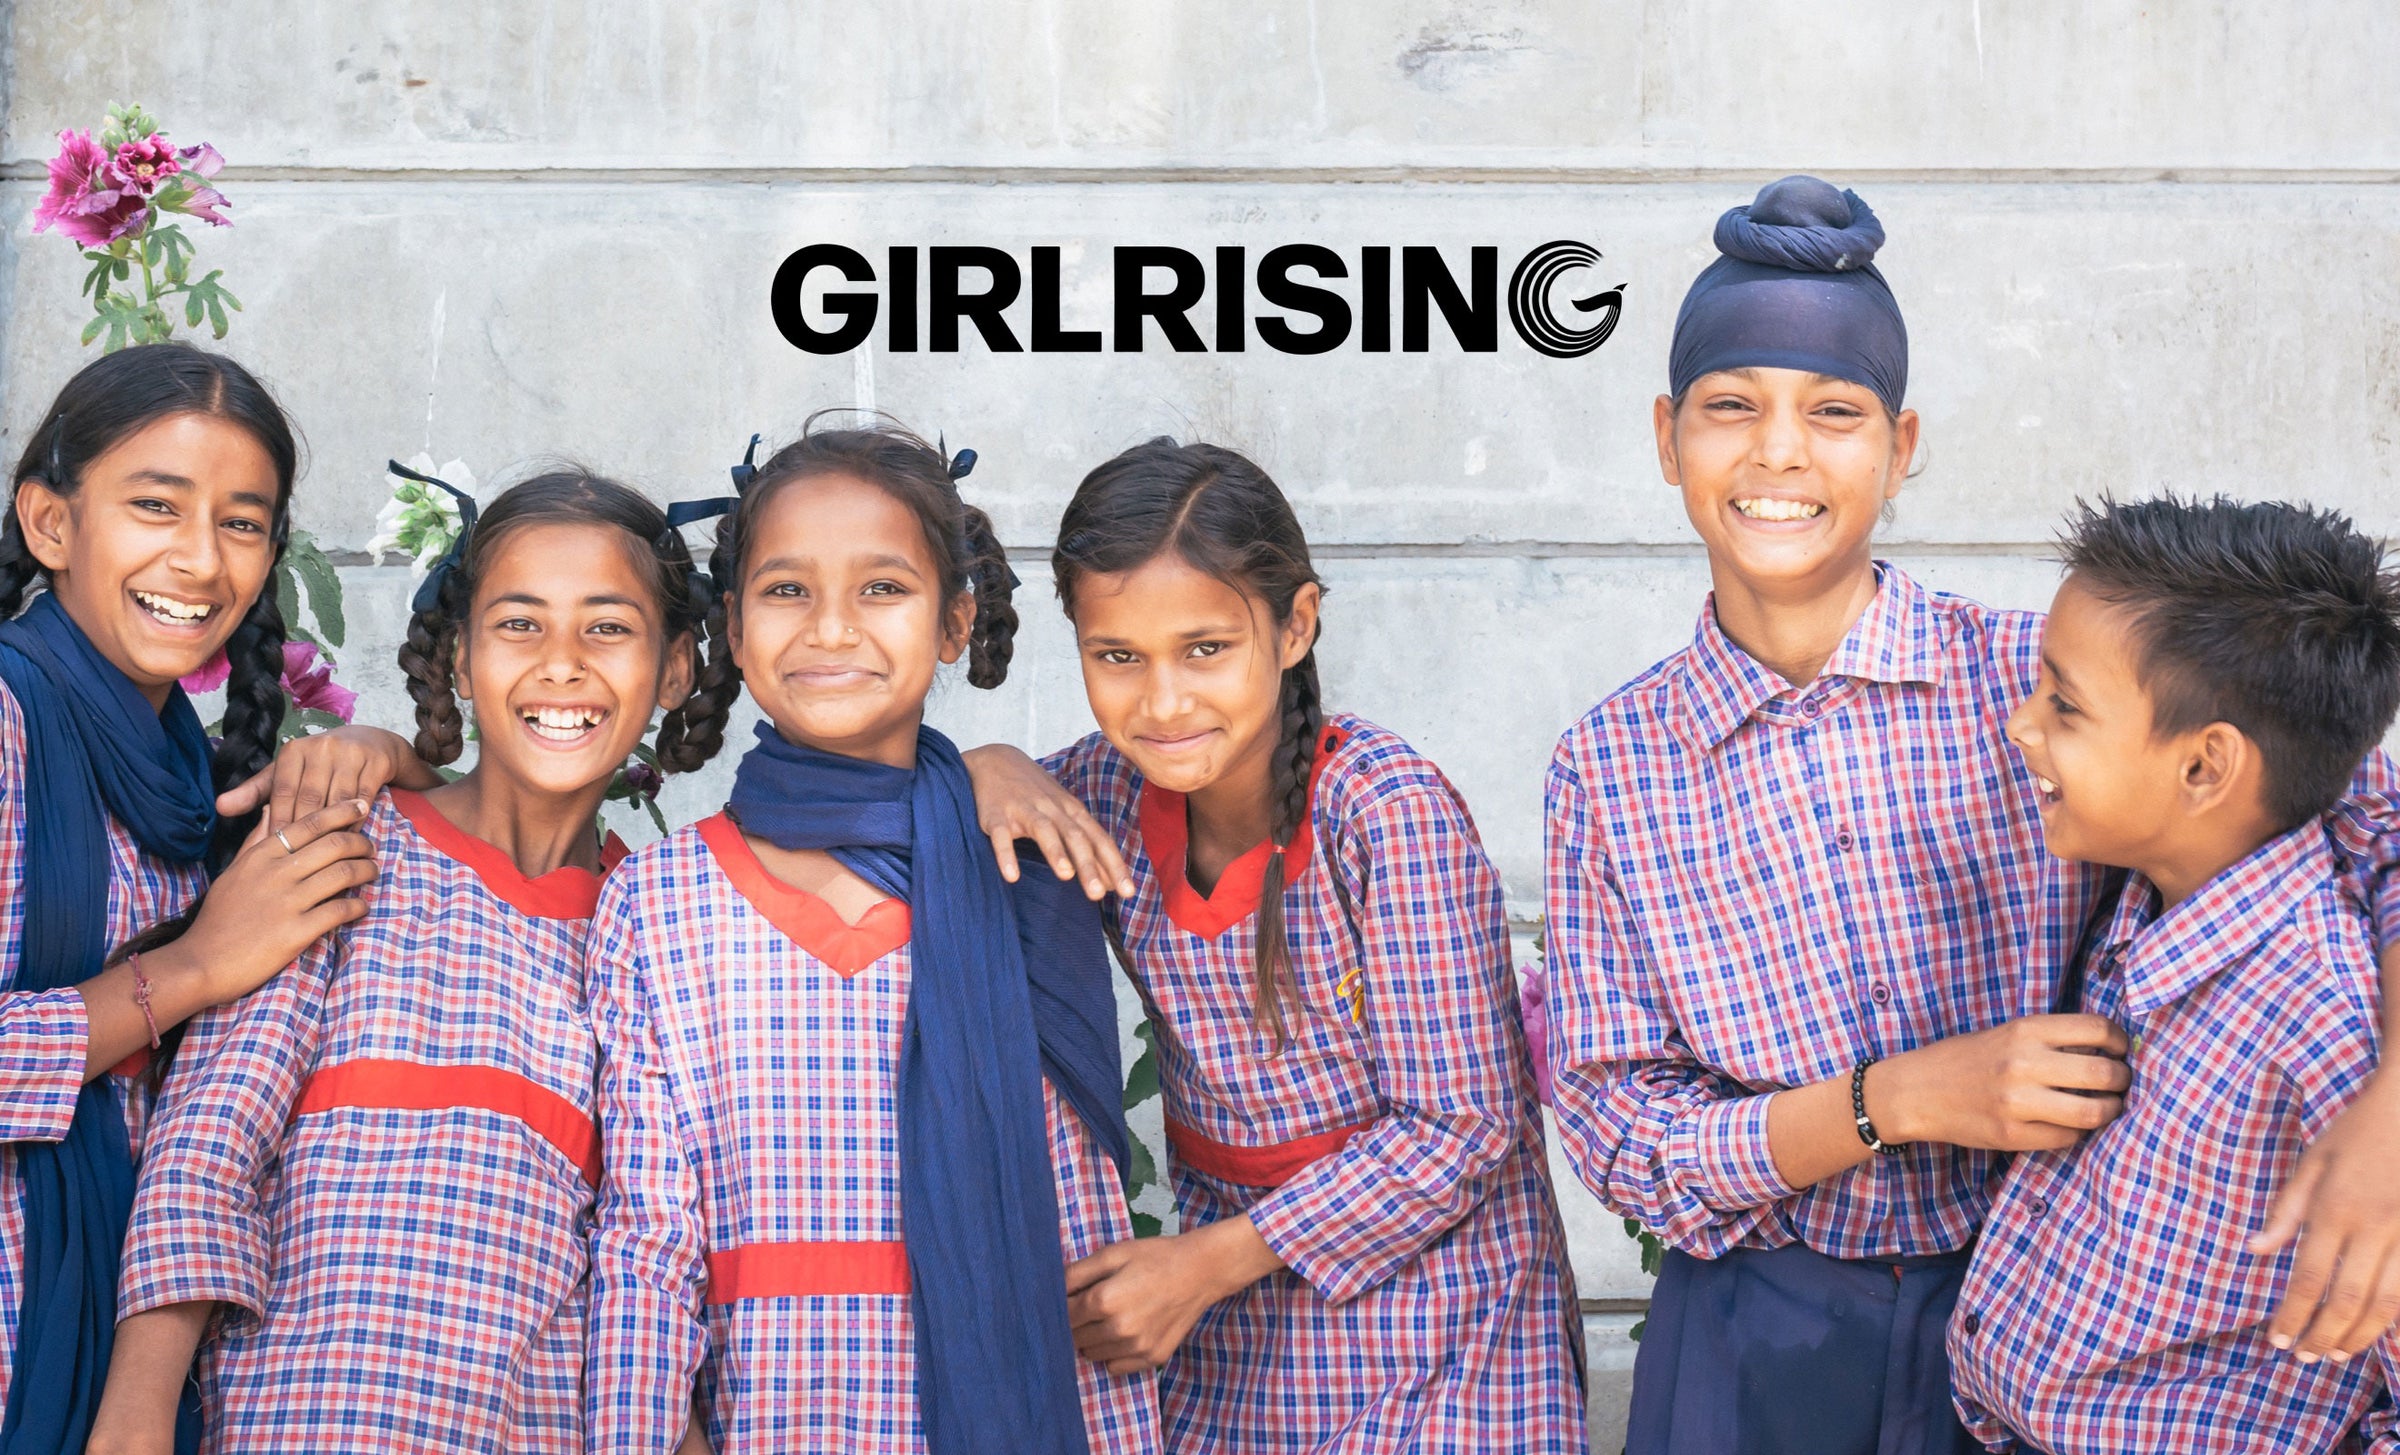 Image of Girl Rising members wearing their uniform with the Girl Rising logo at the top